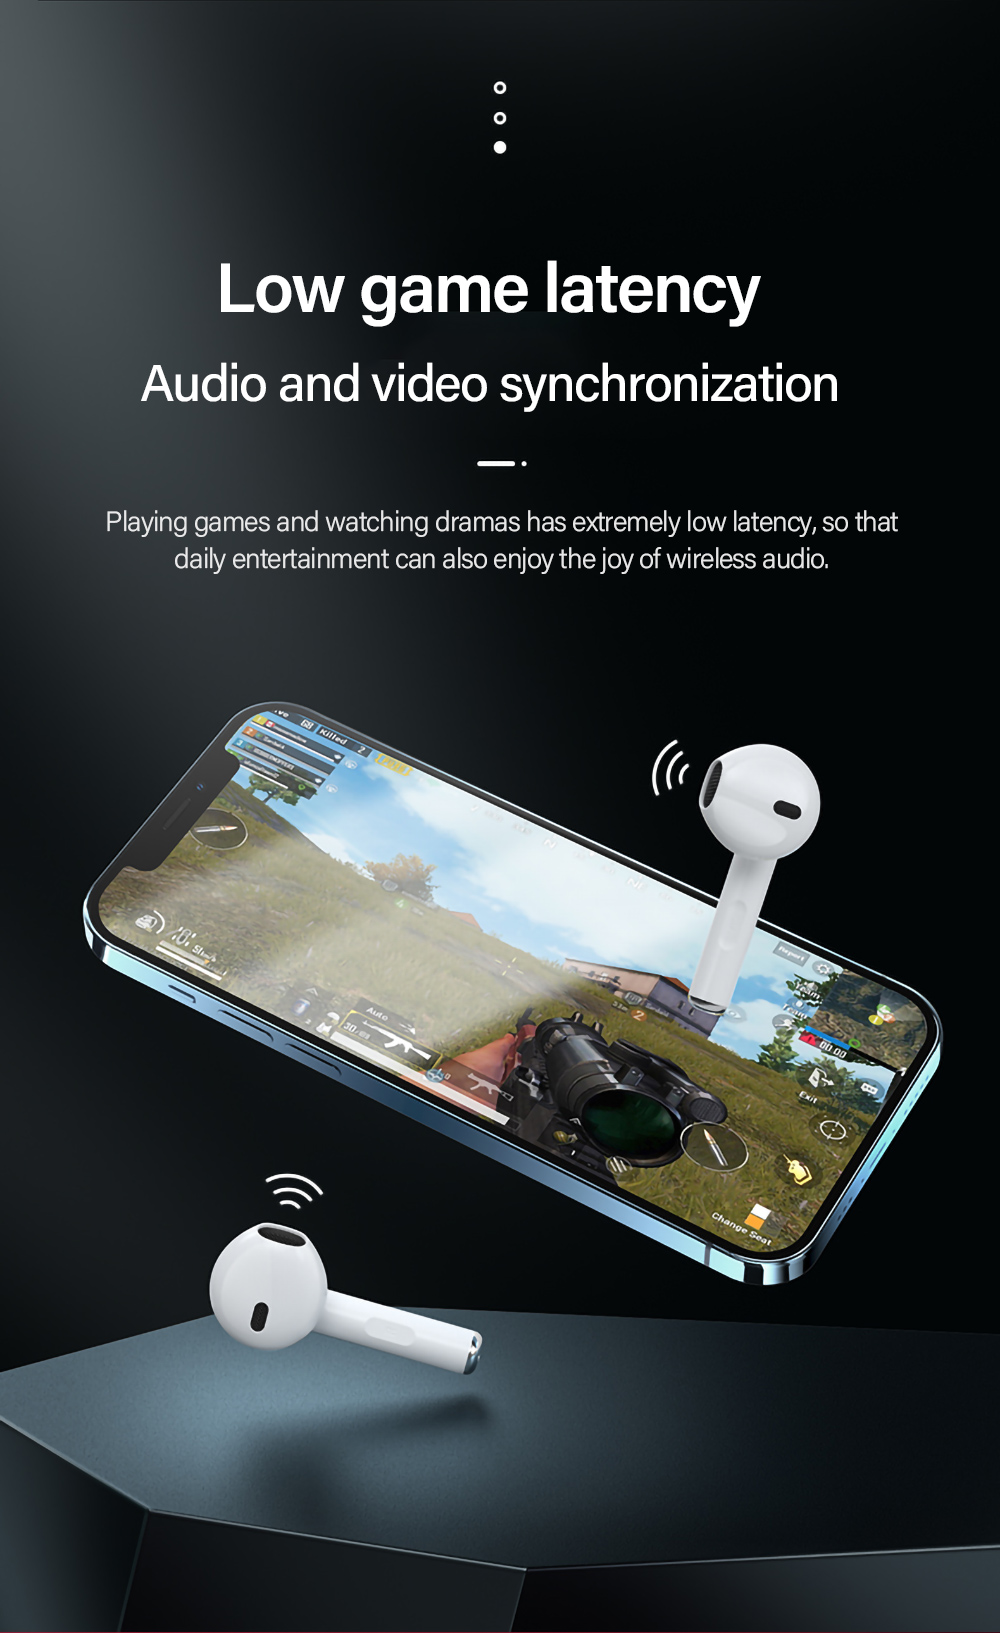 Lenovo-XT83-TWS-Earbuds-bluetooth-50-Earphone-HiFi-Stereo-Game-Low-Latency-Noise-Reduction-Mic-Touch-1873428-3